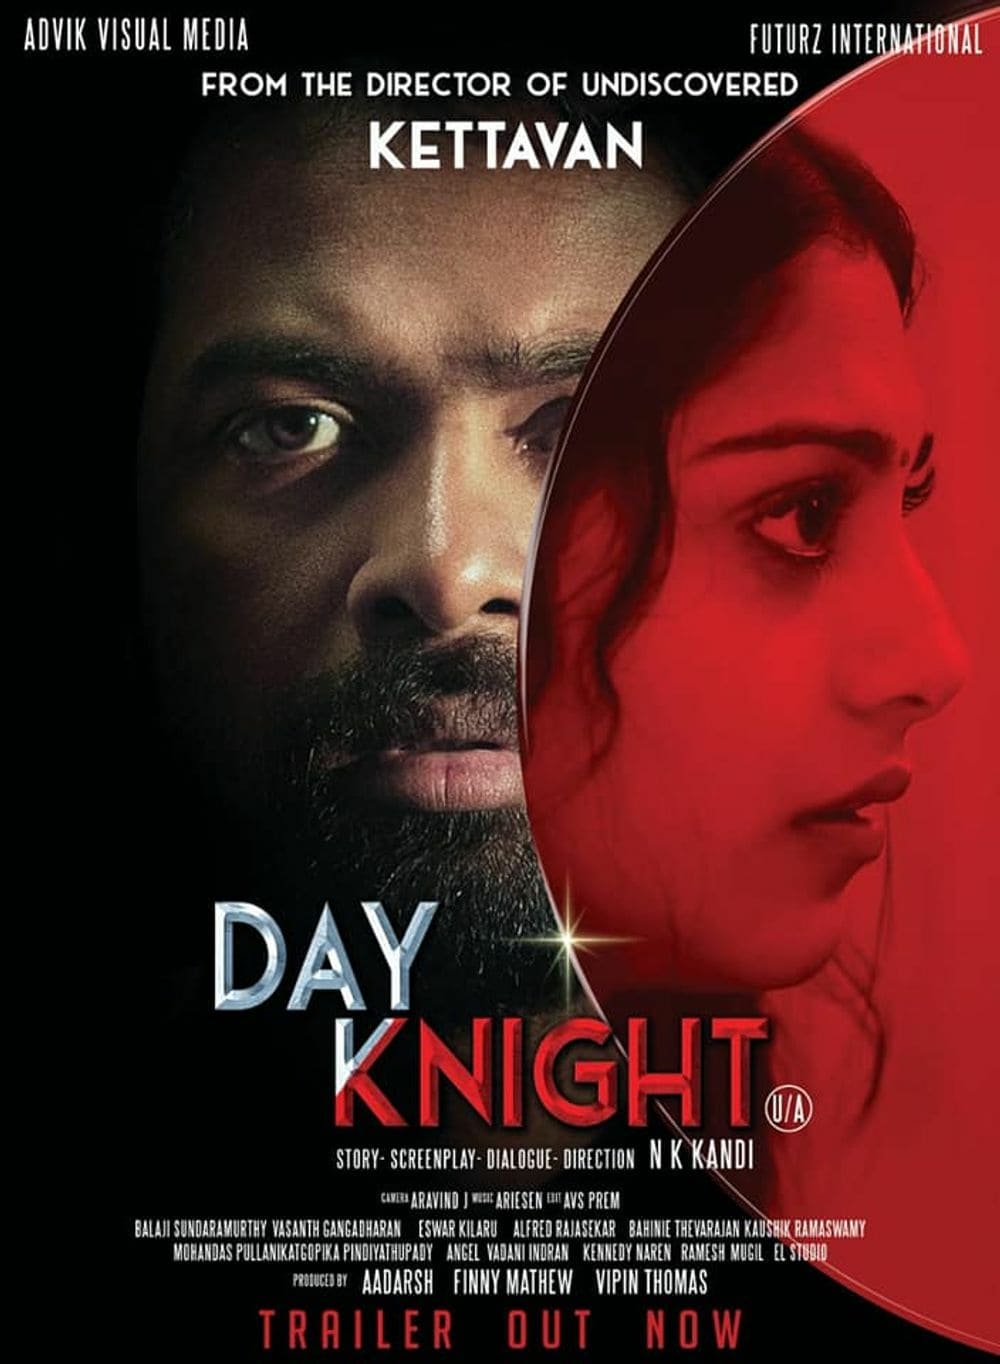 Poster for the movie "Day Knight"